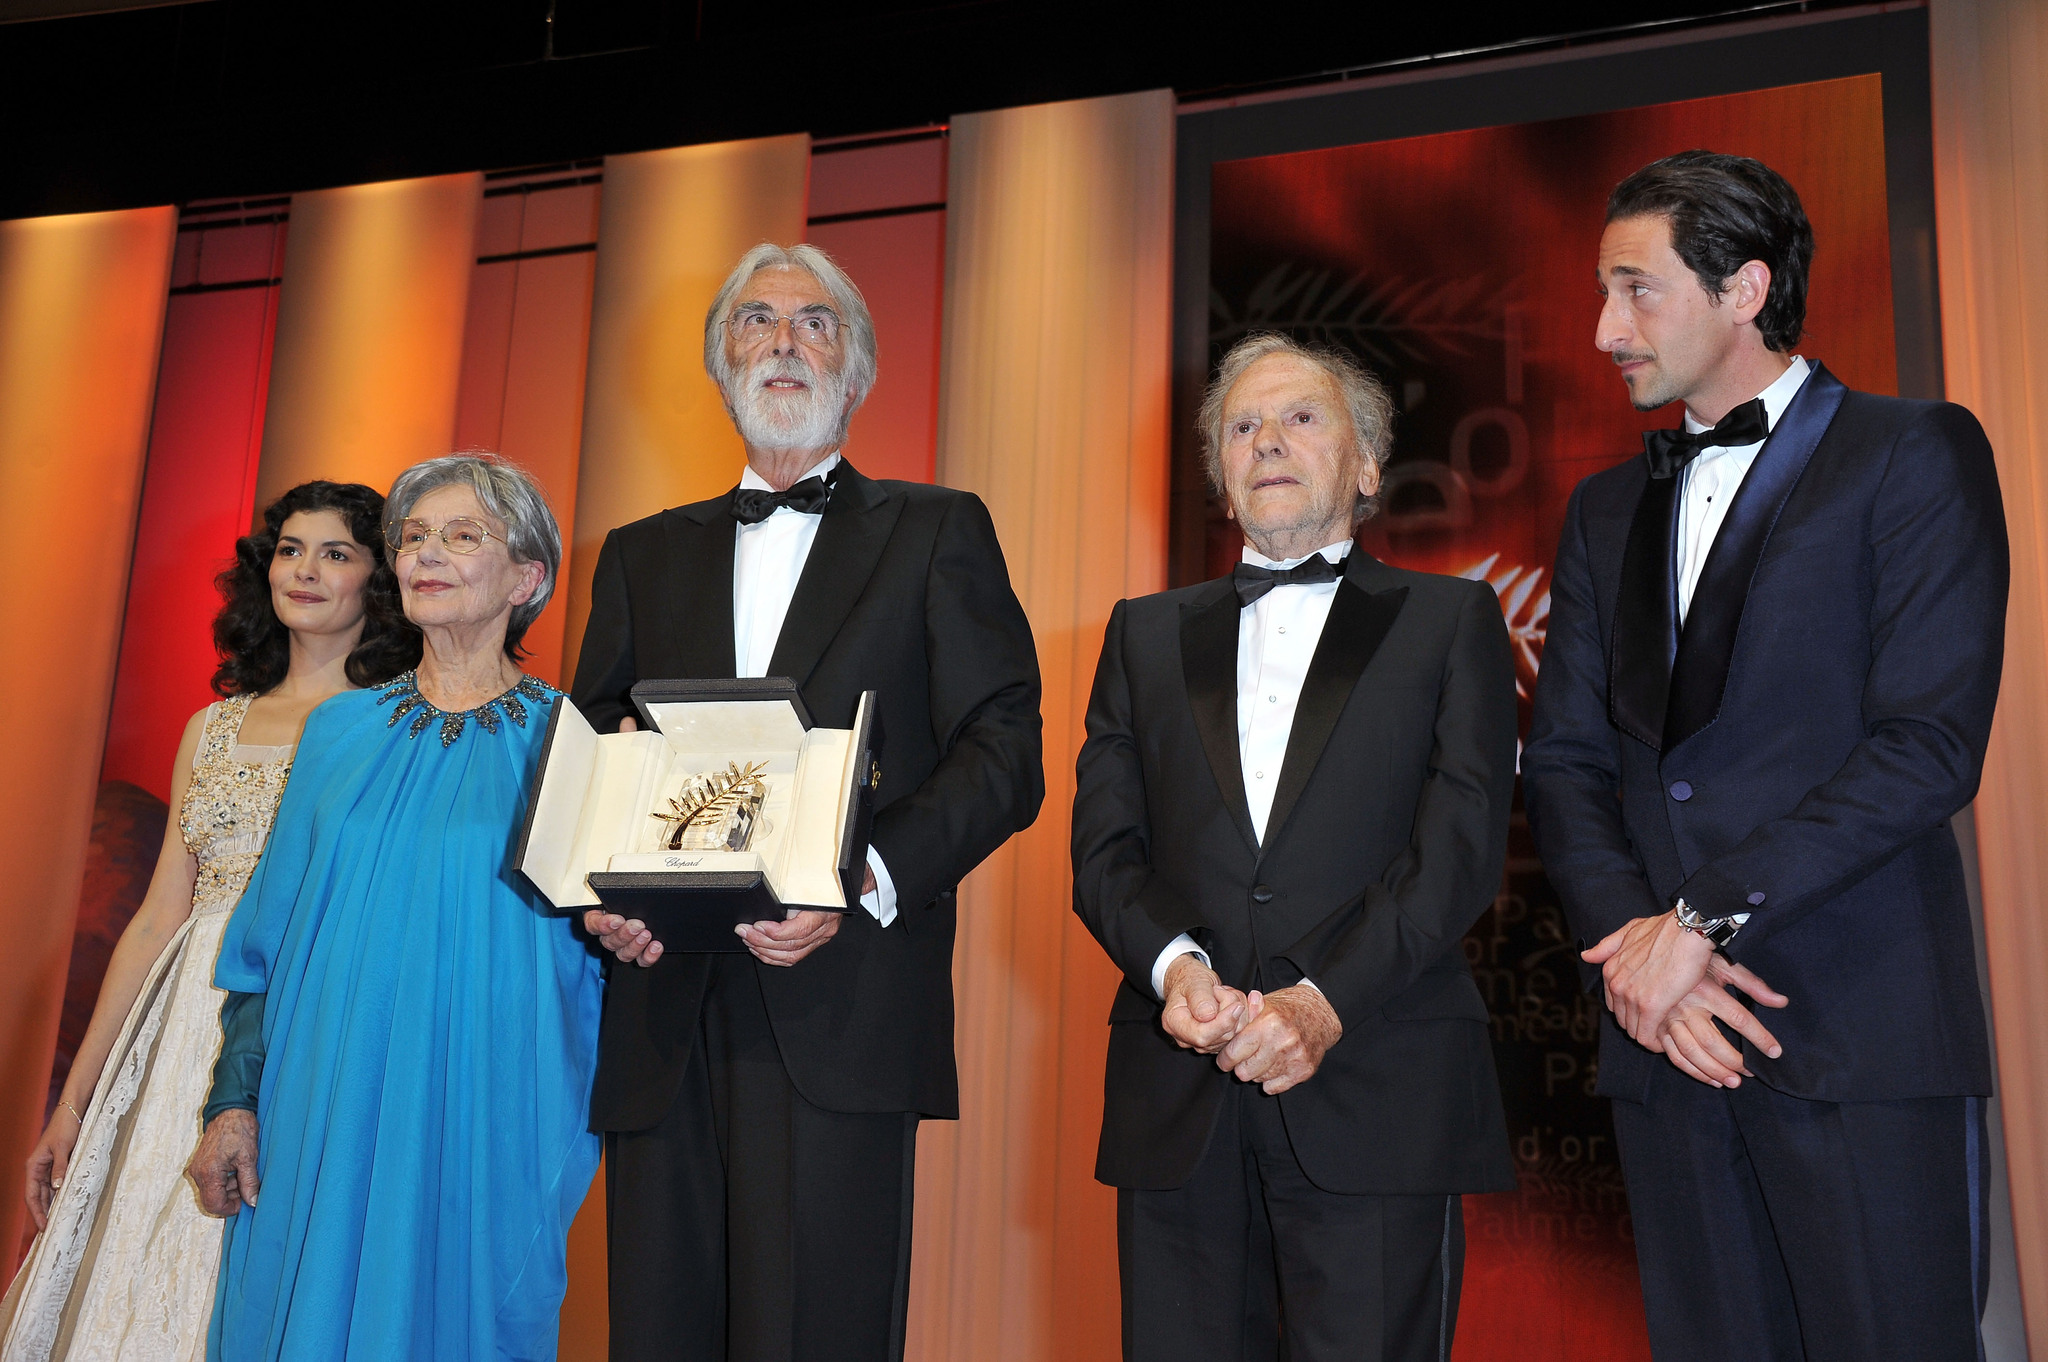 Jean-Louis Trintignant, Adrien Brody, Michael Haneke, Emmanuelle Riva and Audrey Tautou at event of Amour (2012)